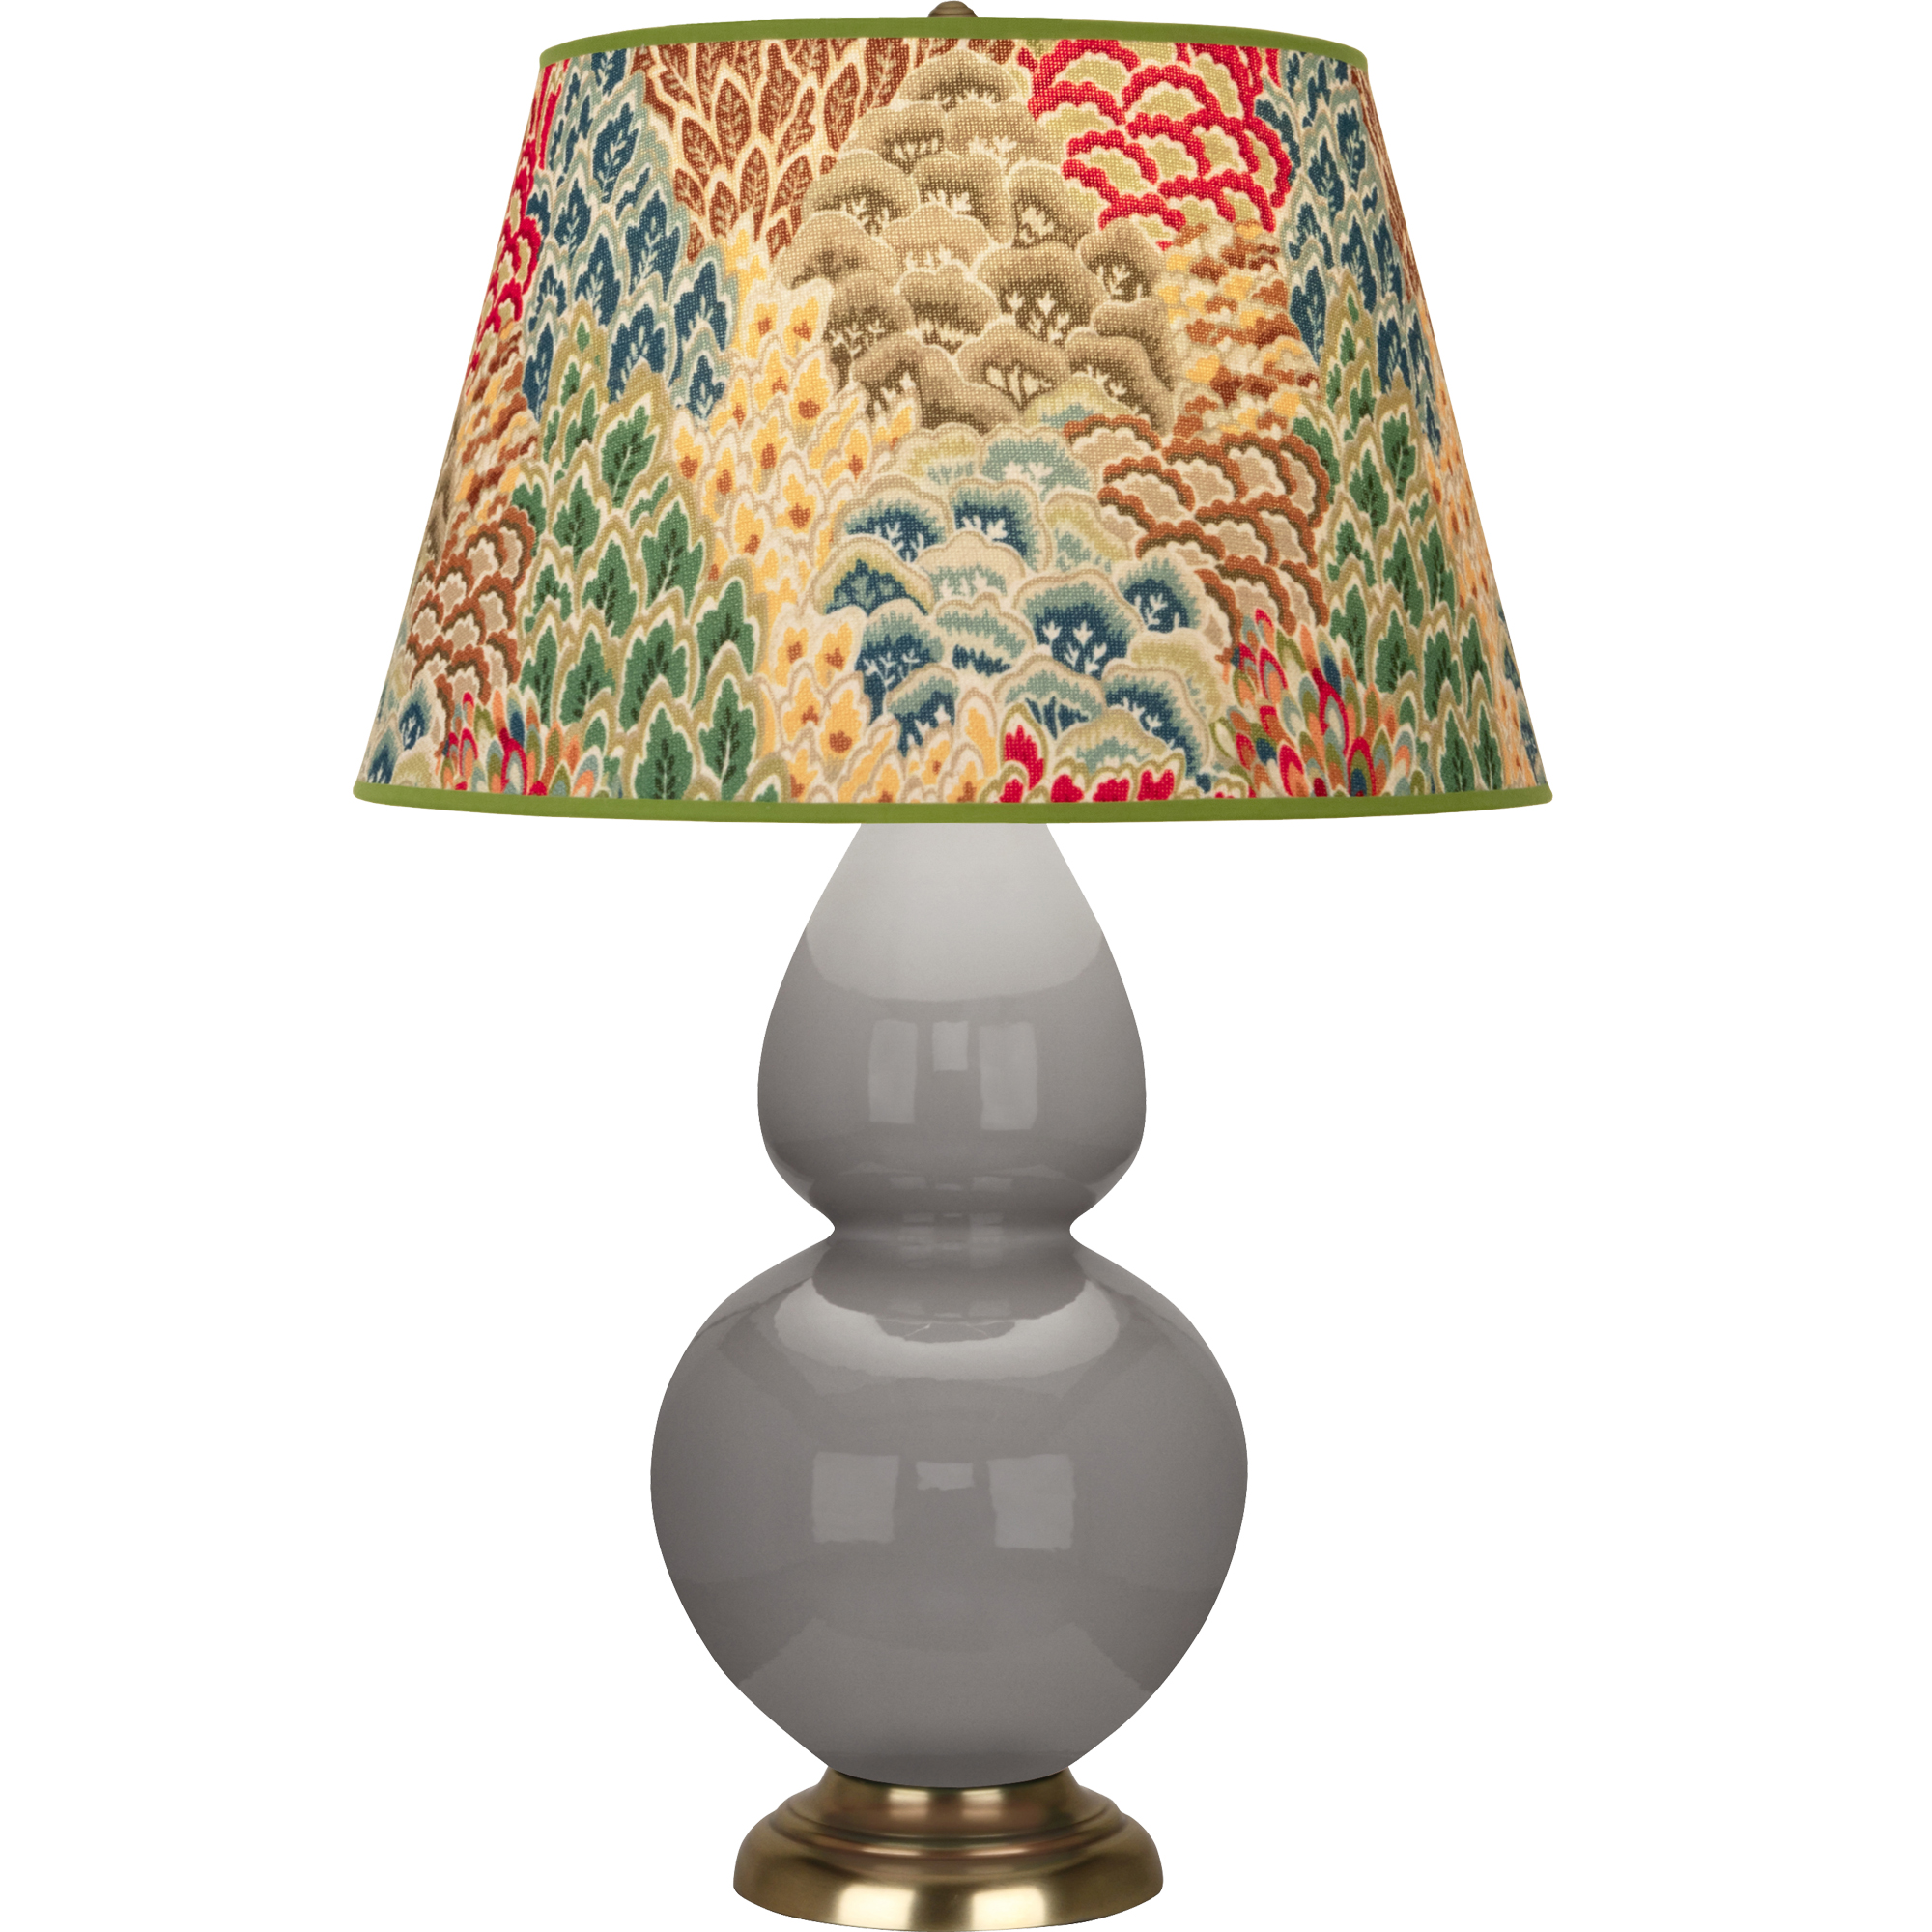 Double Gourd Table Lamp Style #1748F